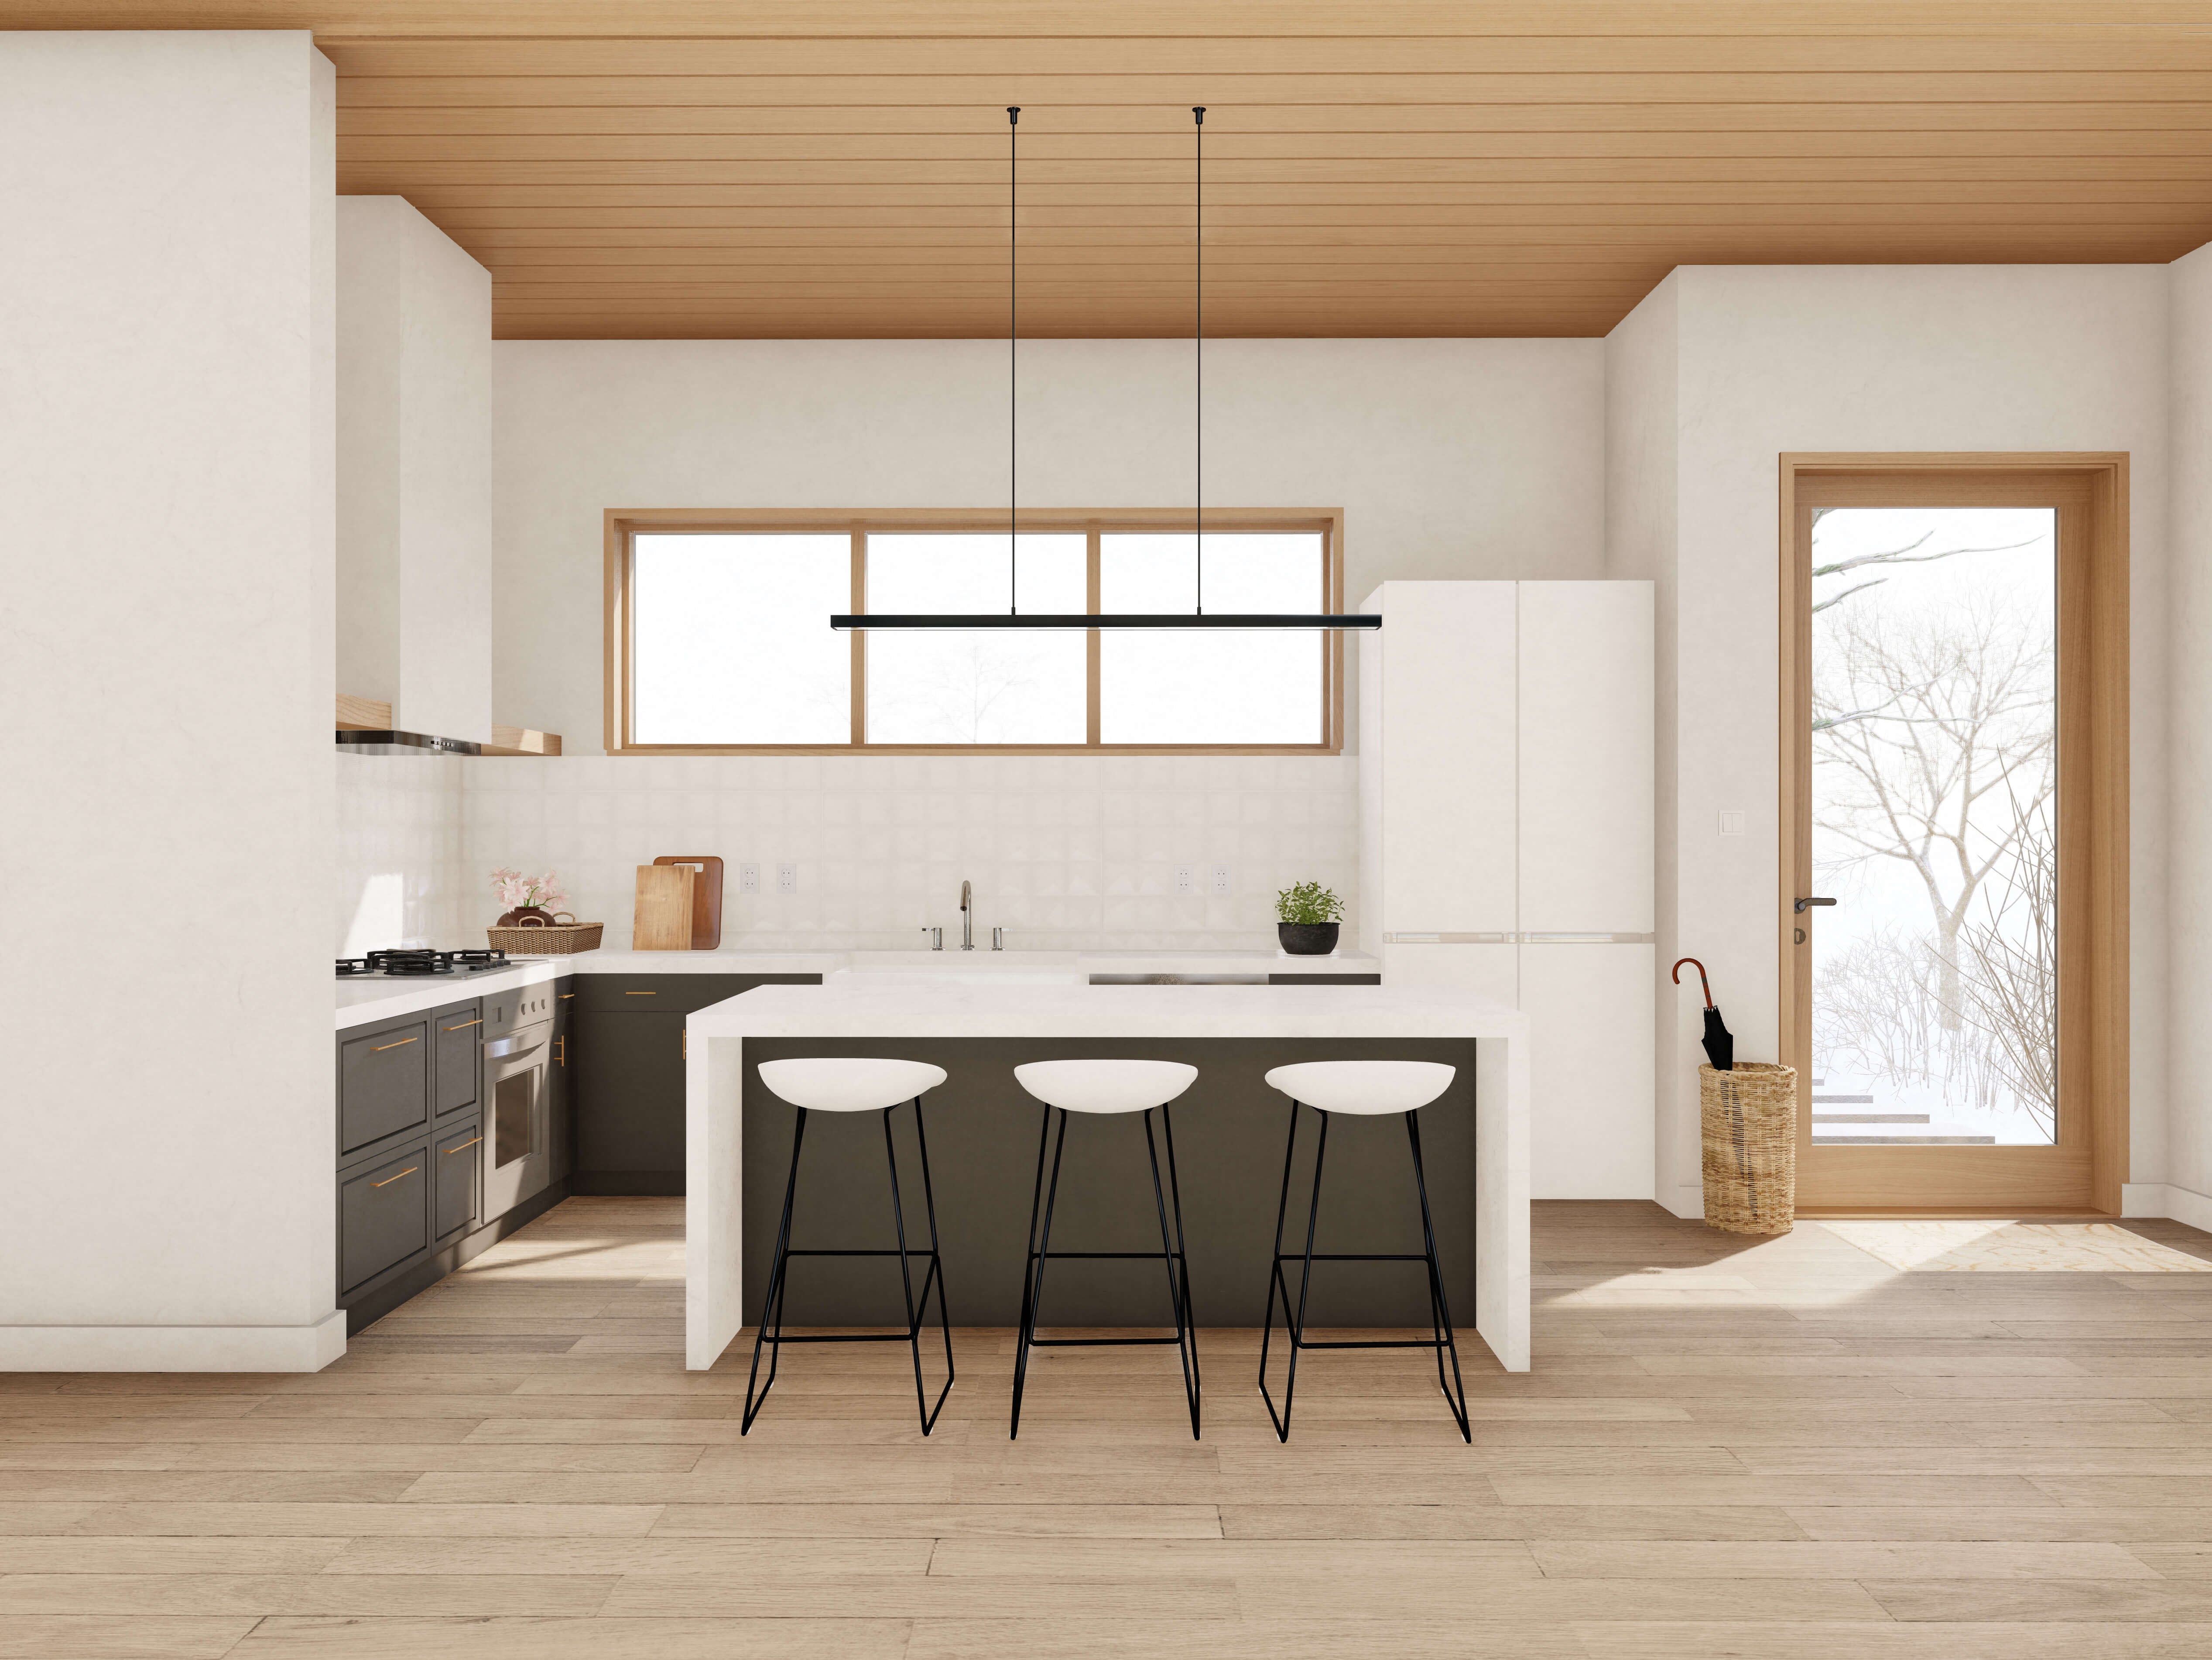 DesignwithFRANK's 2 Bedroom Modern Large Cabin. L shaped Kitchen with Island. White top and black cabinet carcass and doors 